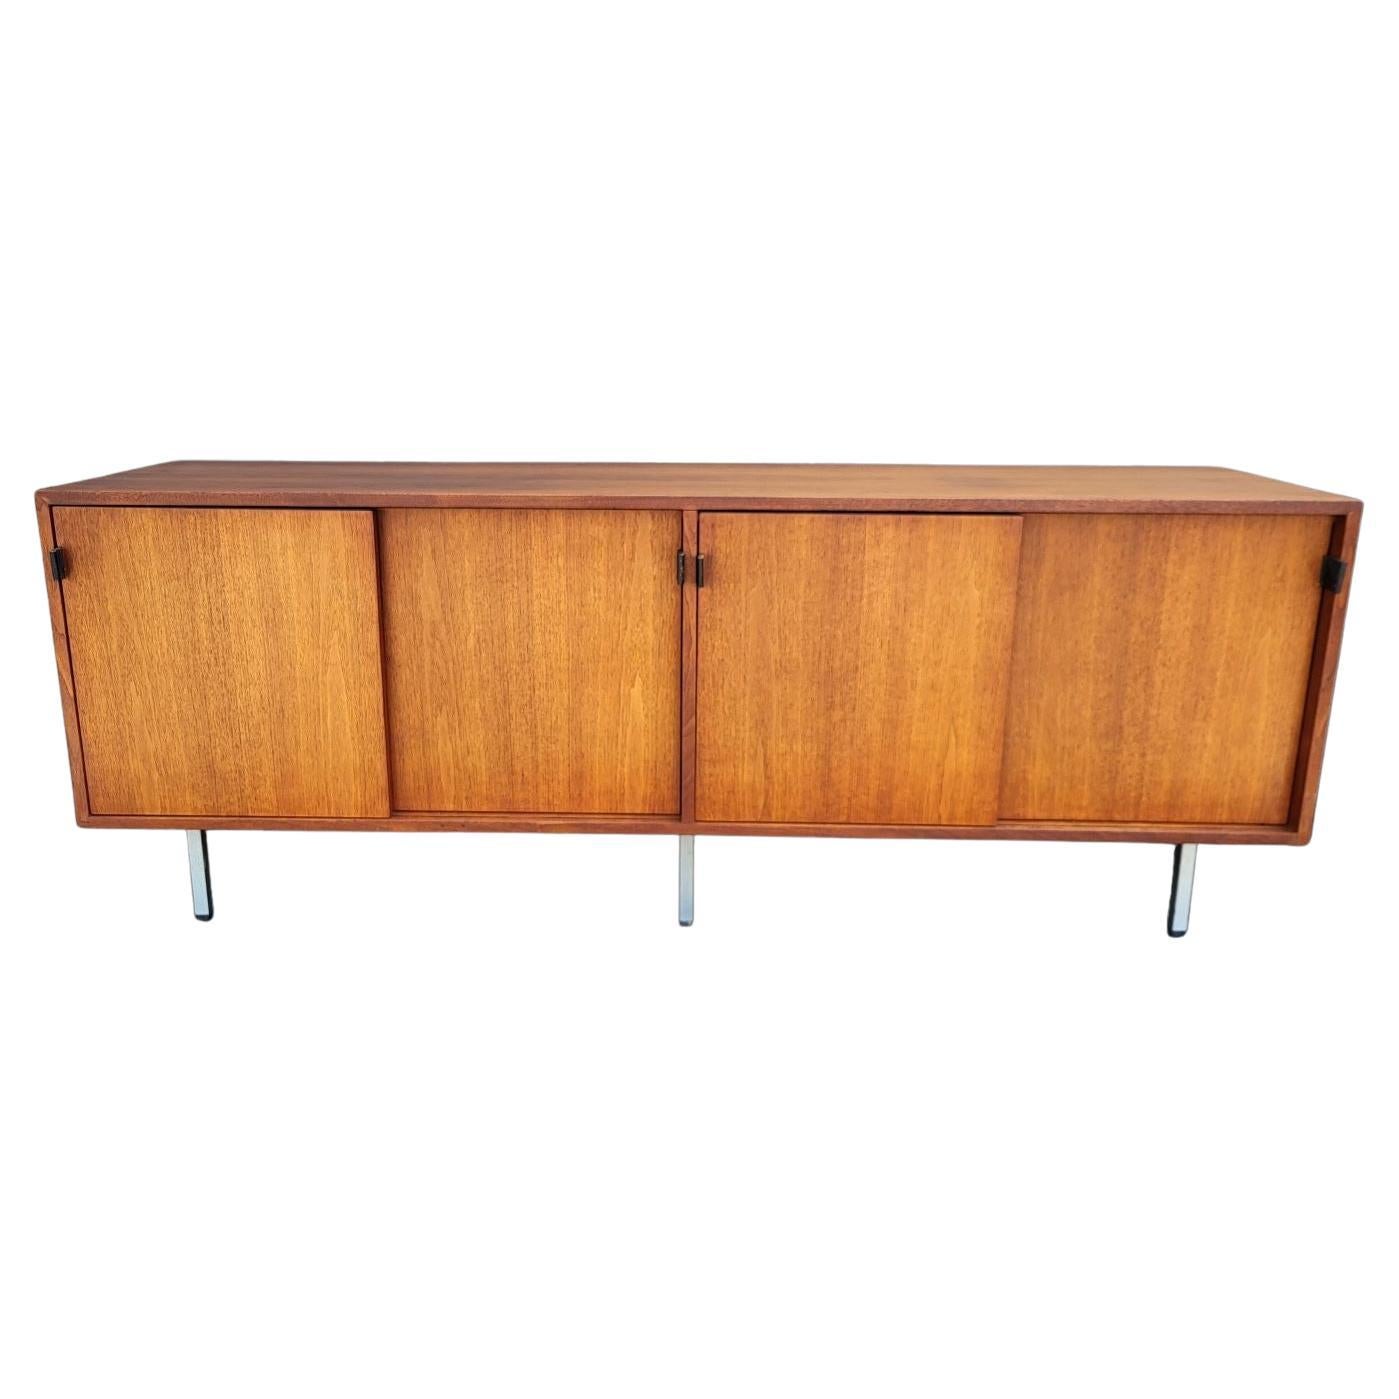 Florence Knoll For Knoll Mid Century Modern Credenza C.1963